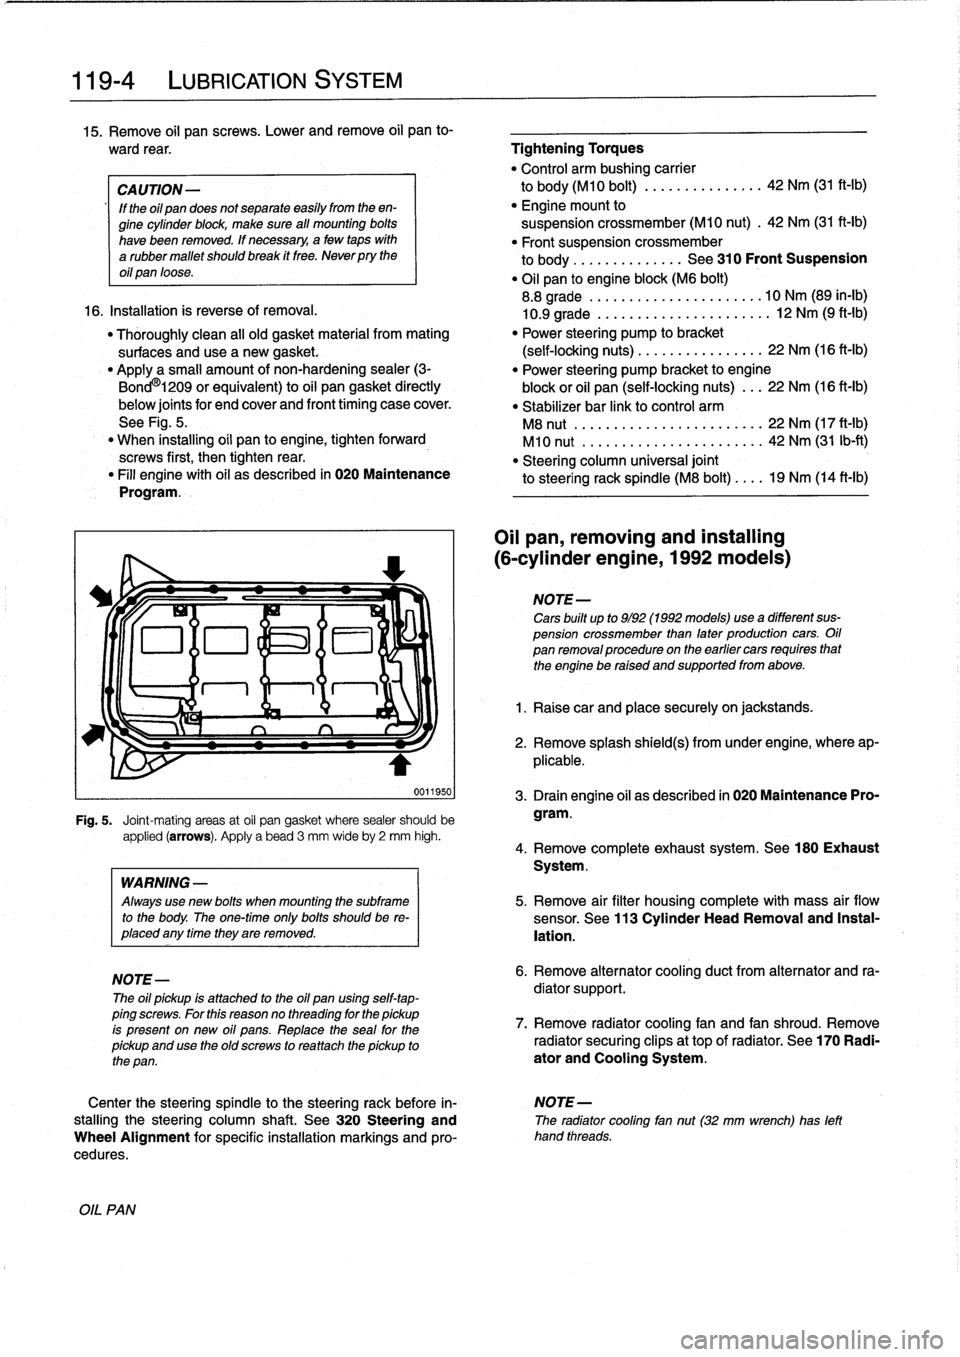 BMW 328i 1997 E36 Workshop Manual 
119-
4

	

LUBRICATION
SYSTEM

15
.
Remove
oil
pan
screws
.
Lower
andremove
oil
pan
to-

ward
rear
.

	

Tightening
Torques

"
Control
arm
bushing
carrier

CAUTION-

	

to
body(M10
bolt)
............